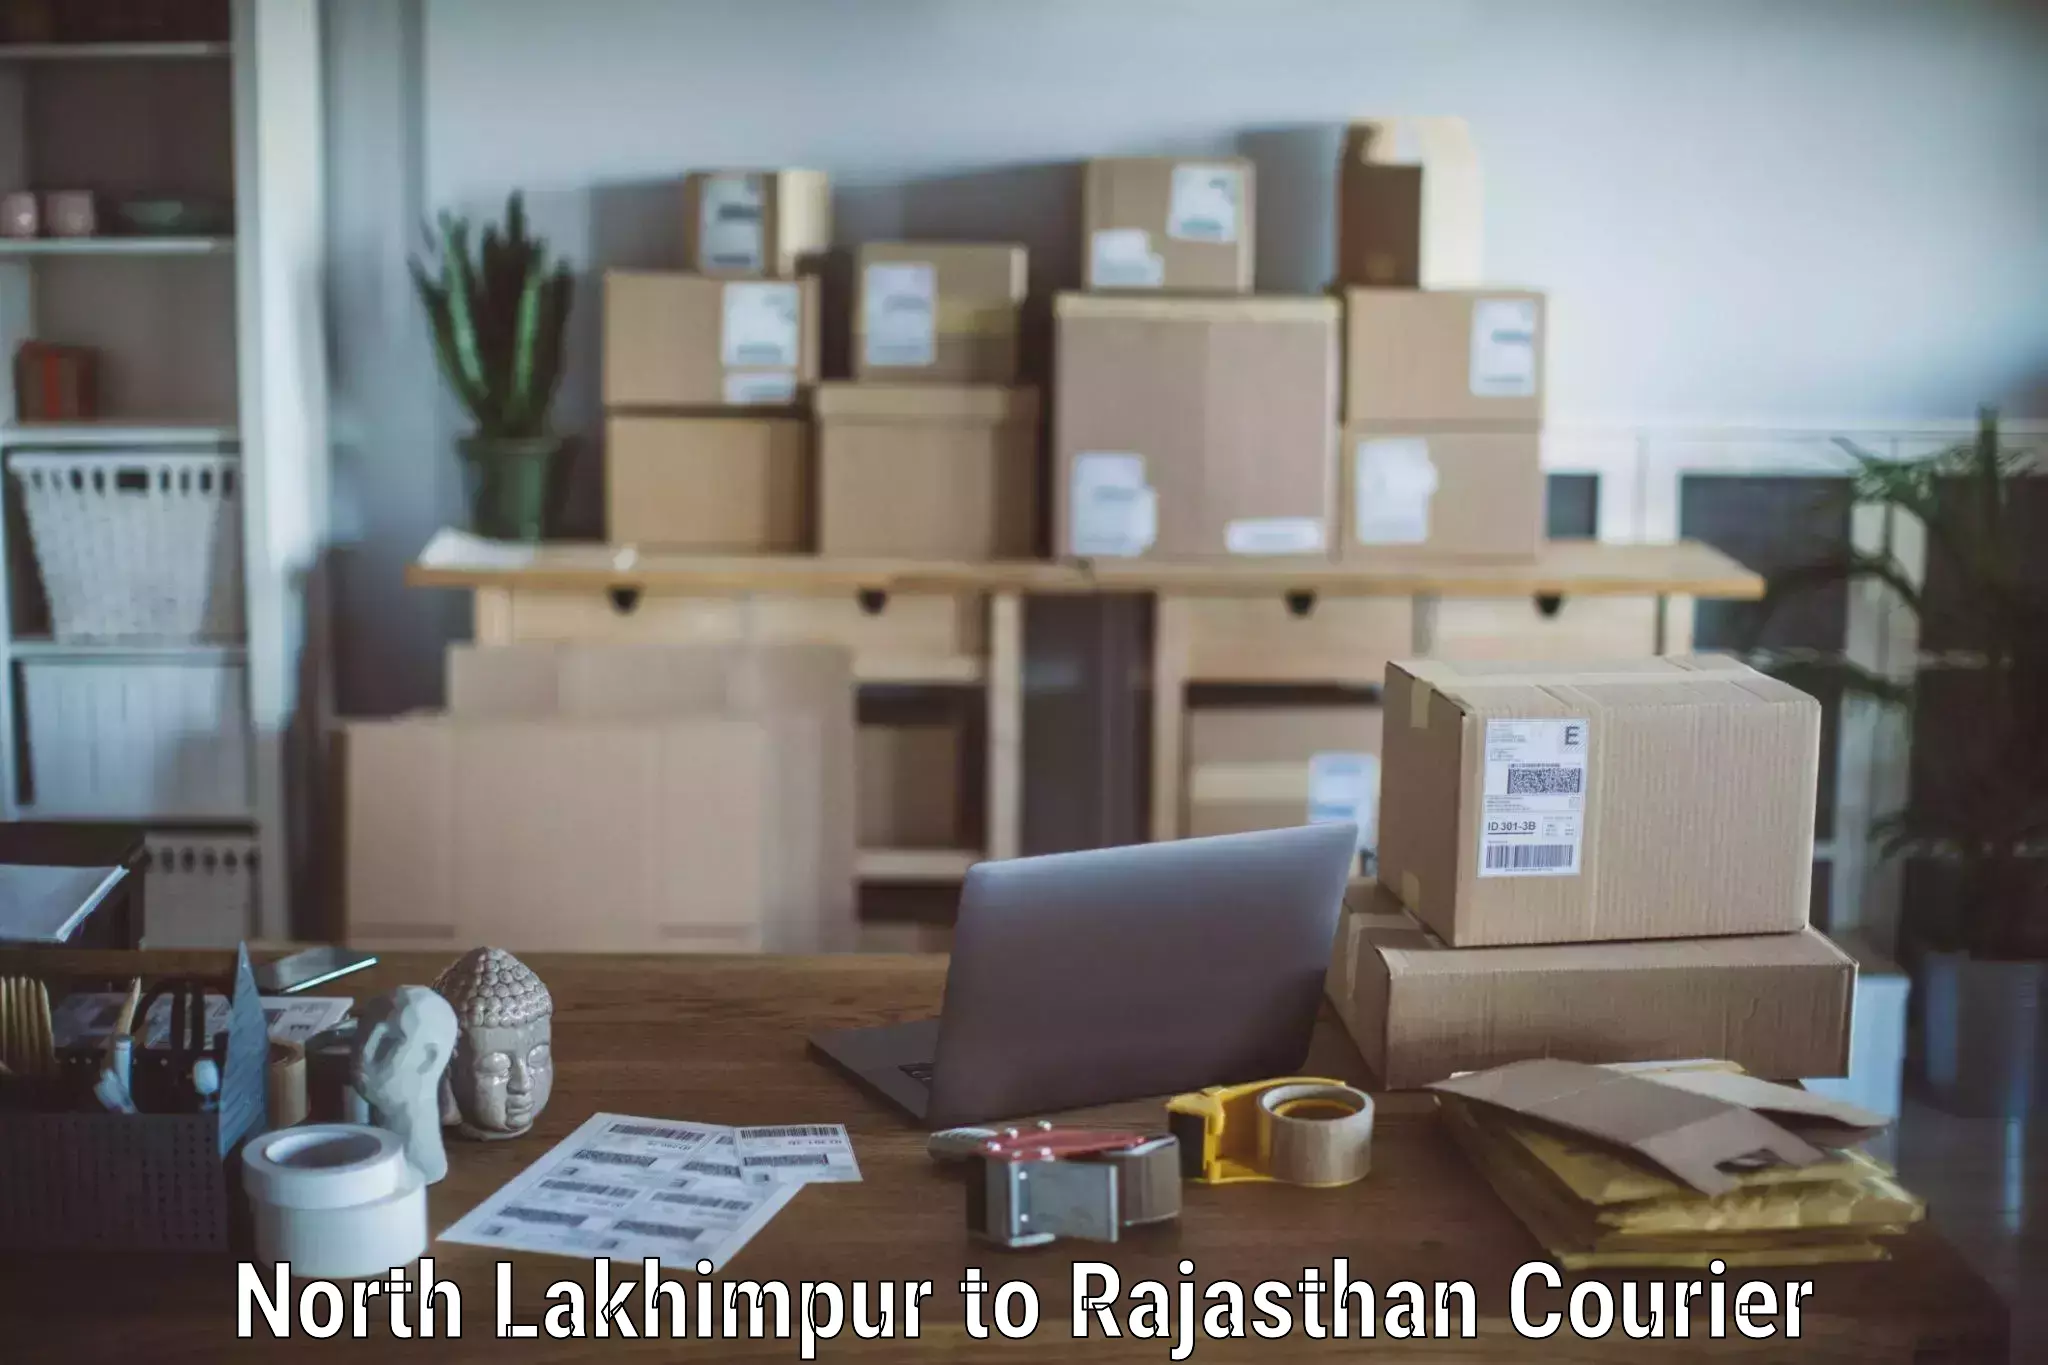 Moving and packing experts North Lakhimpur to Piparcity